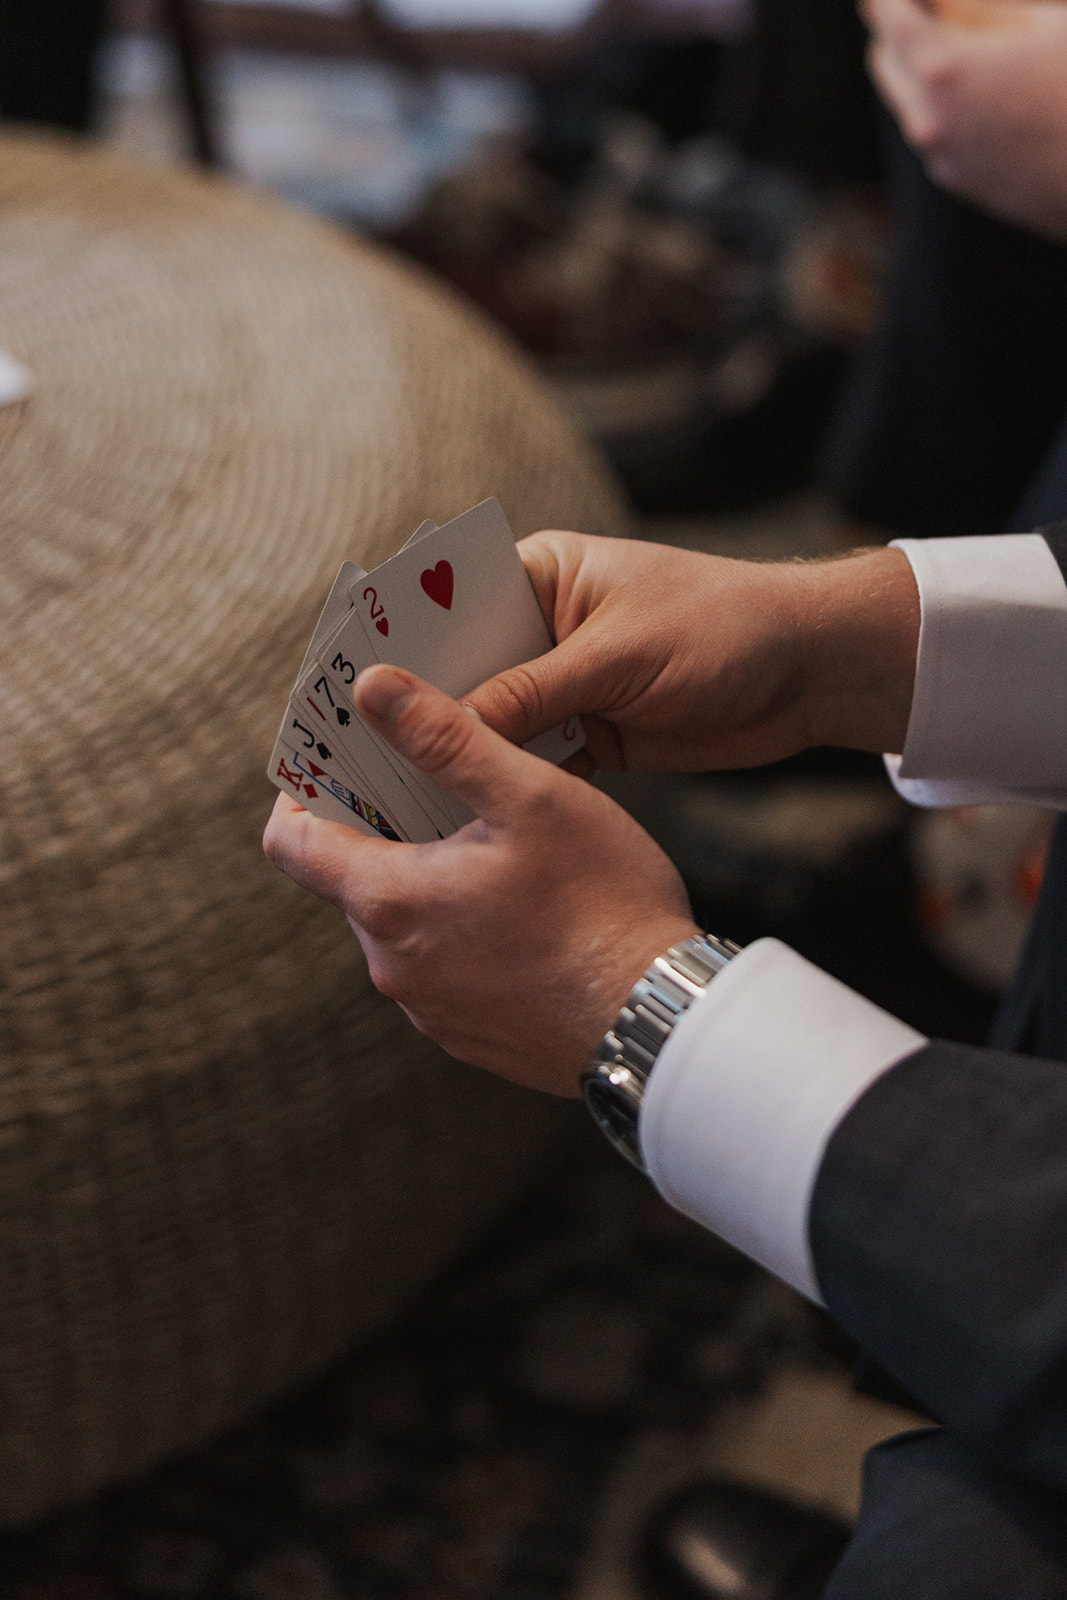 Groom and groomsmen play cards before the big wedding day